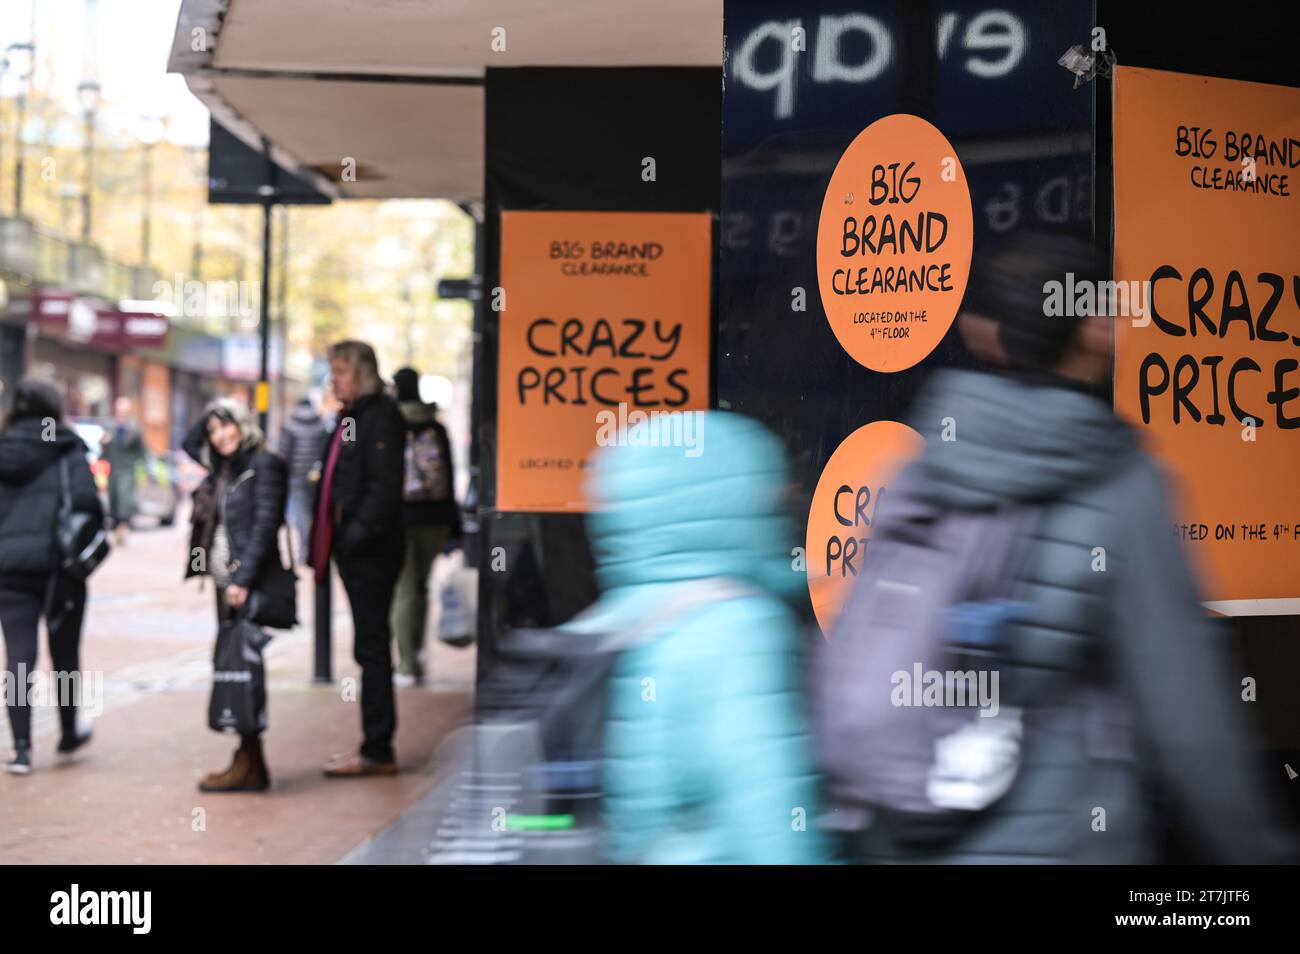 New Street, Birmingham November 16th 2023 - Sale posters in Birmingham city centre shops on the run-up to Black Friday. Pic by Credit: Stop Press Media/Alamy Live News Stock Photo